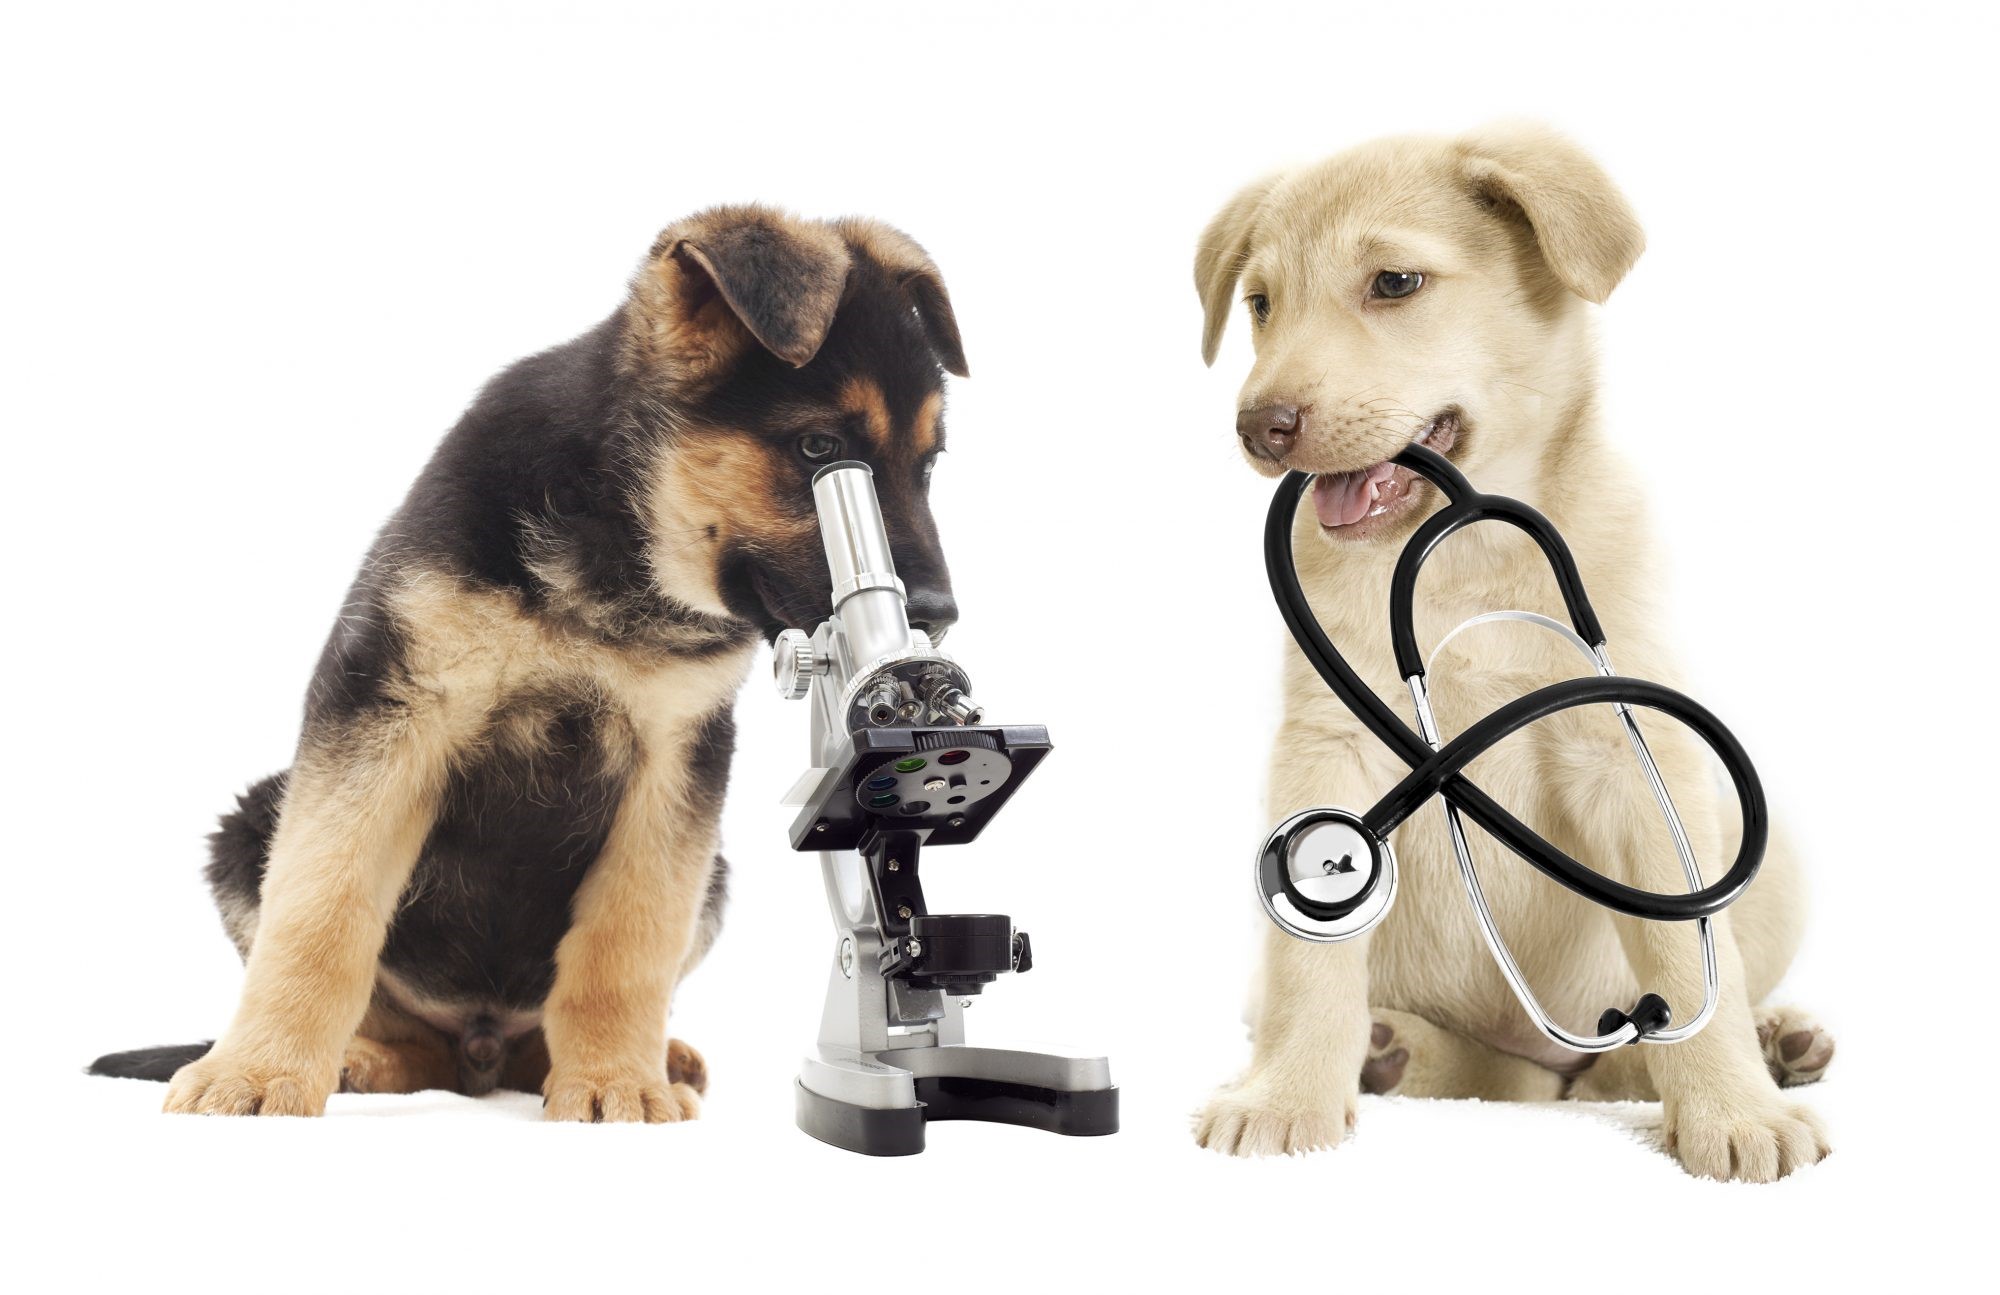 two dogs are playing with stethoscope and microscope